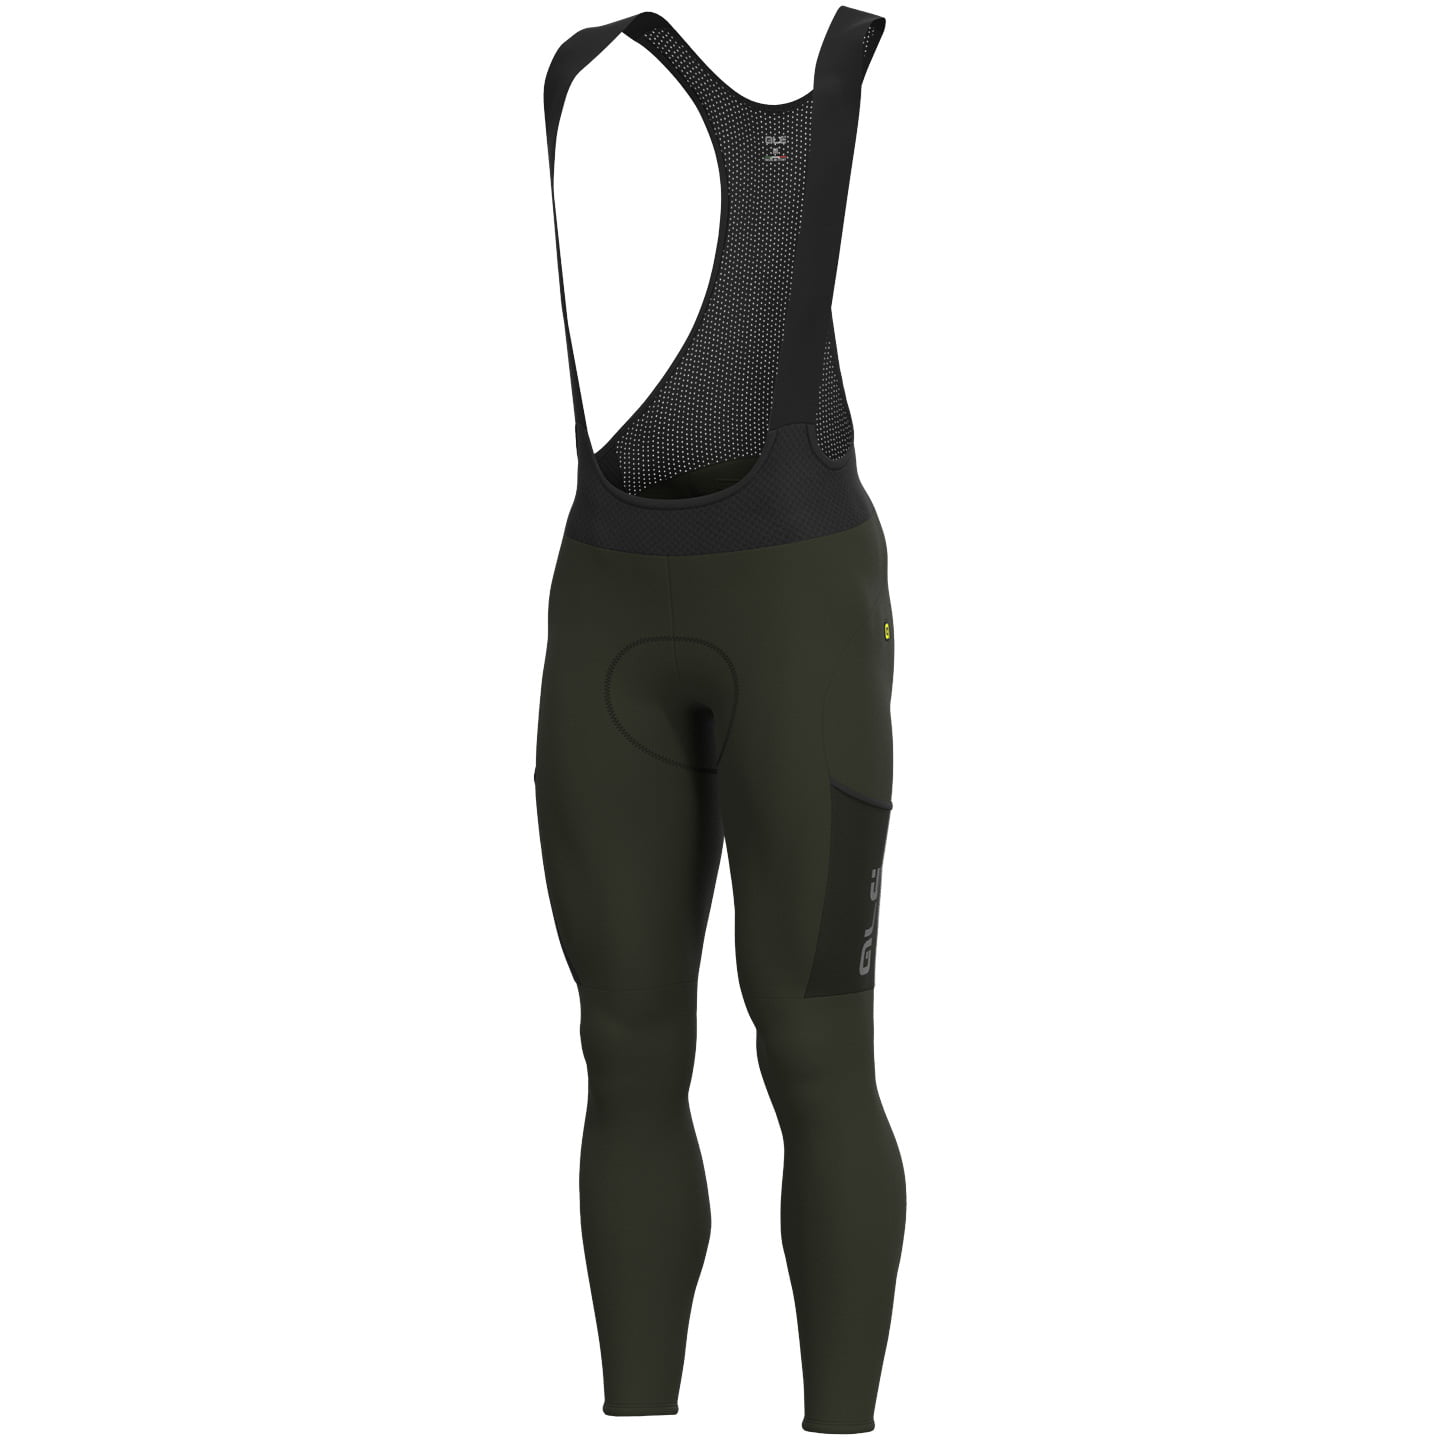 ALE Stones Cargo Bib Tights Bib Tights, for men, size M, Cycle tights, Cycling clothing